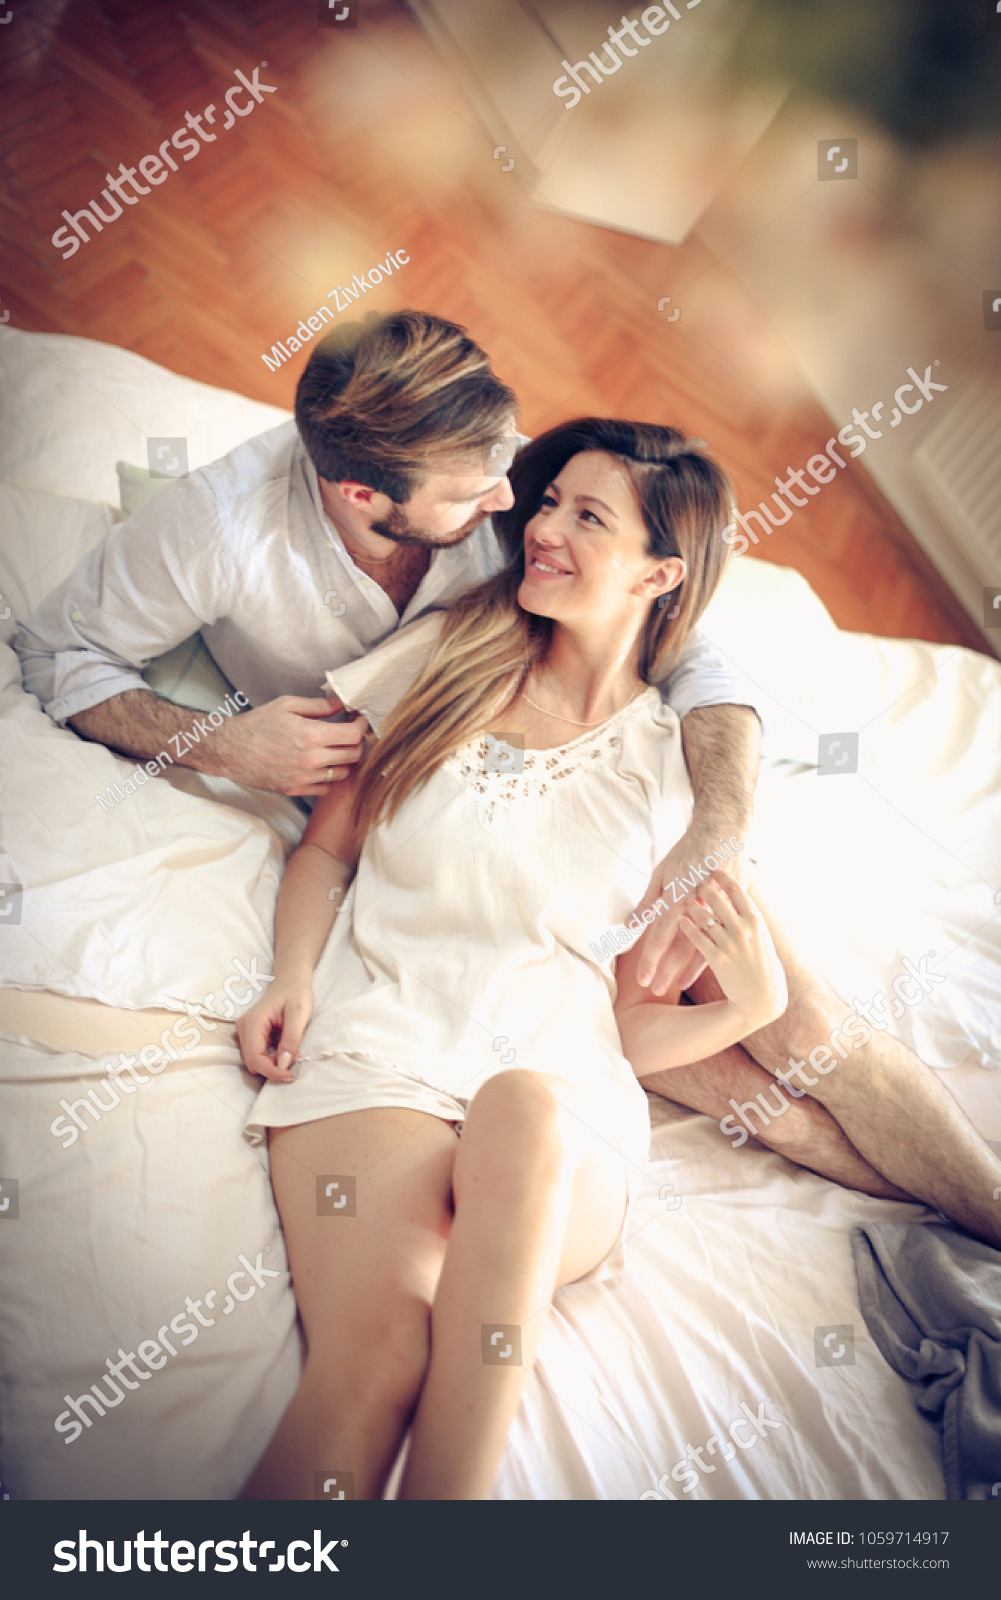 Happy young couple in bed. Space for copy. #1059714917